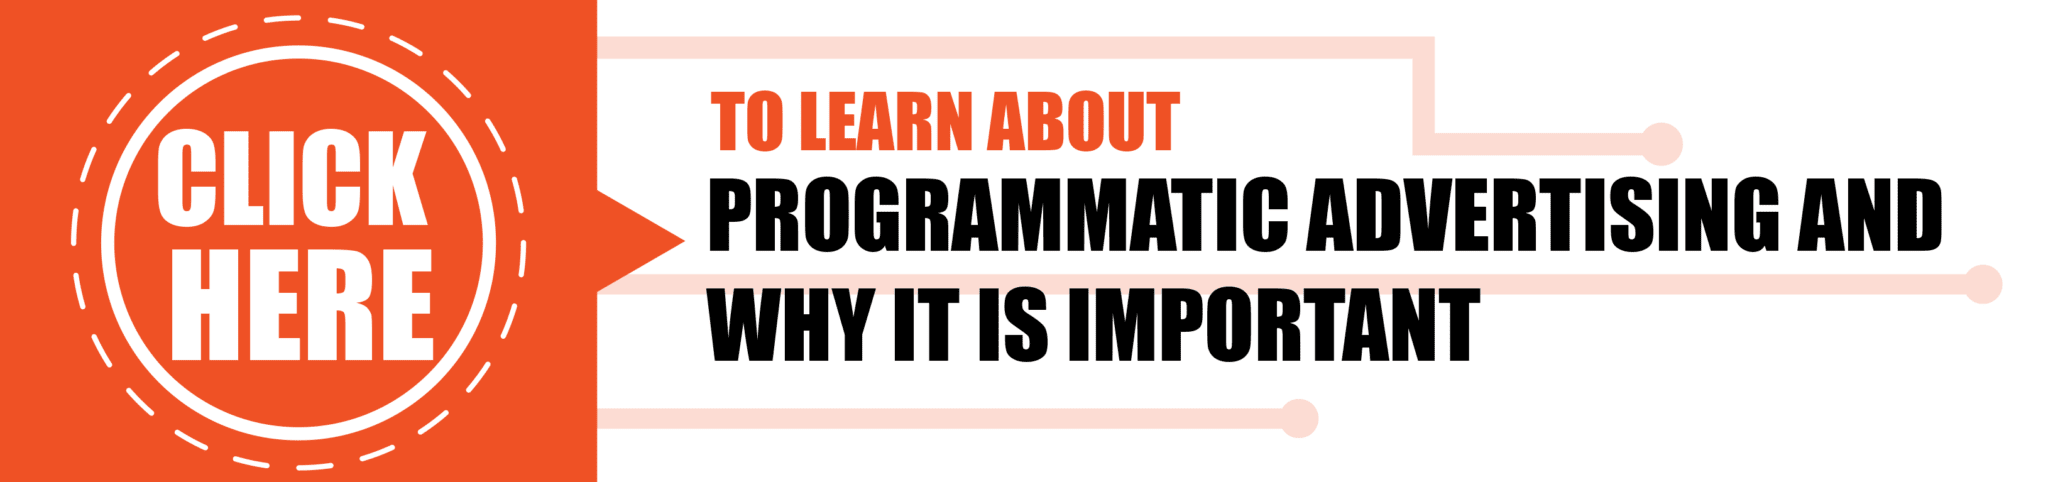 Programmatic Advertising and Why It Is Important